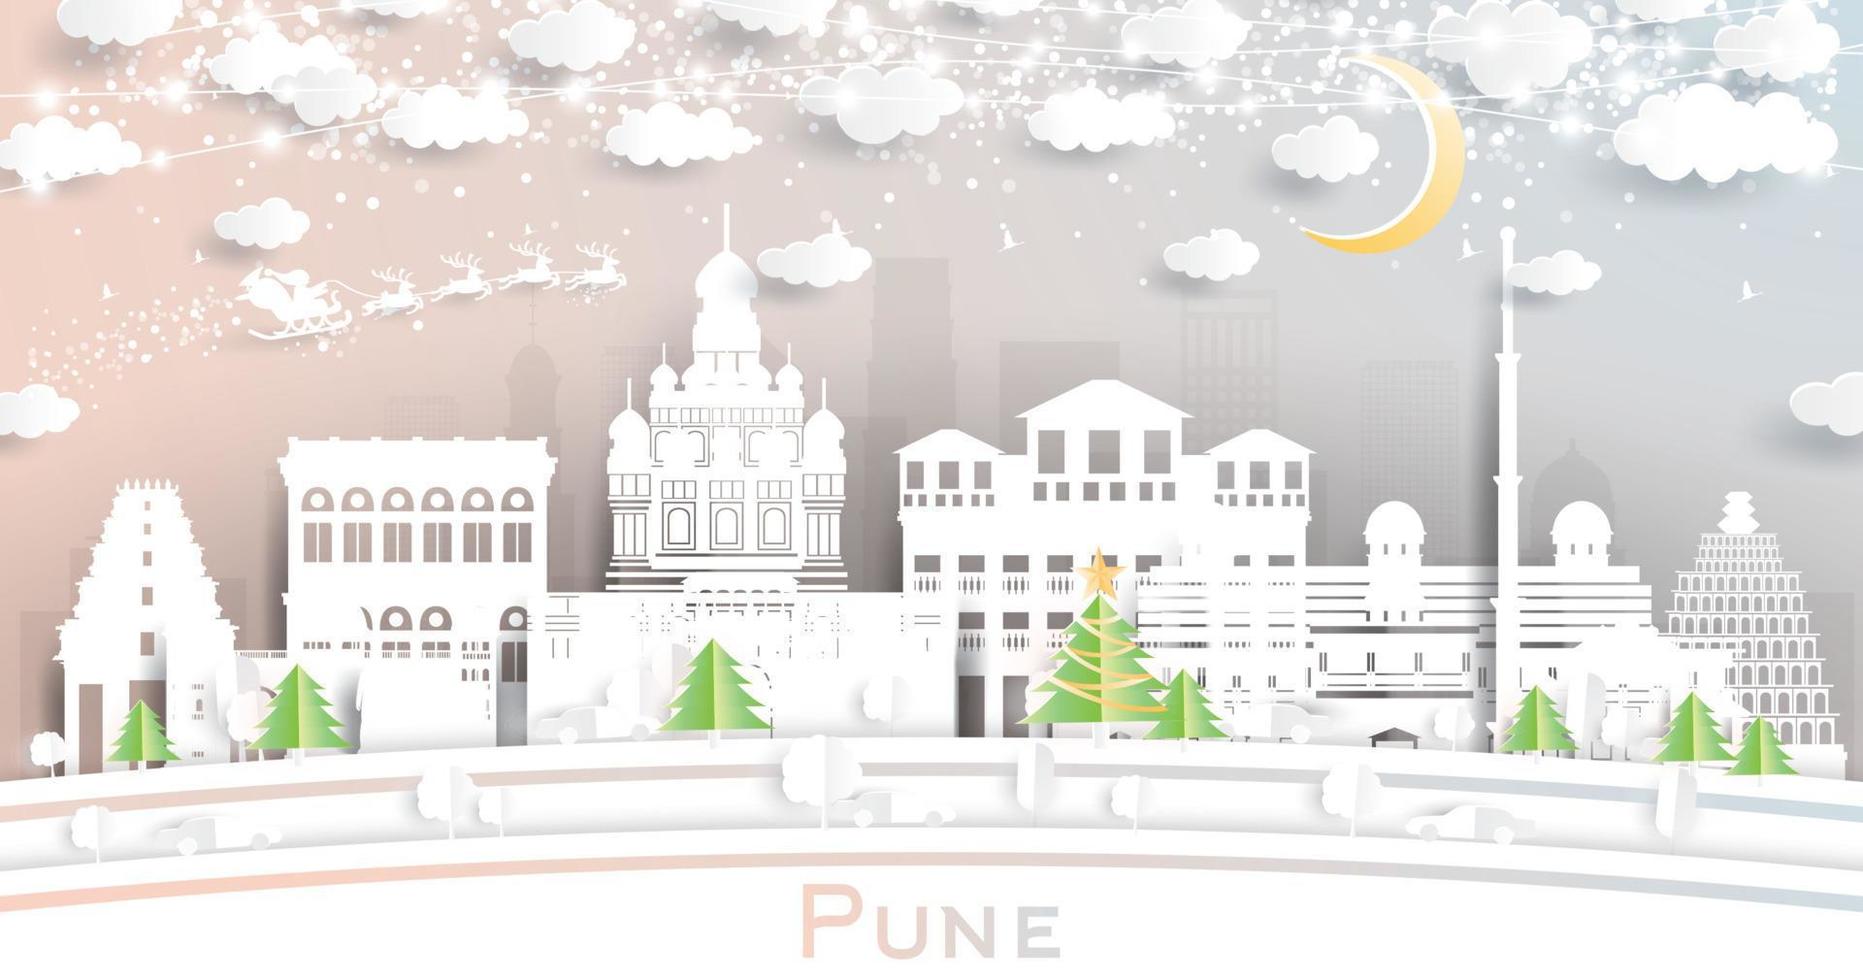 Pune India City Skyline in Paper Cut Style with Snowflakes, Moon and Neon Garland. vector